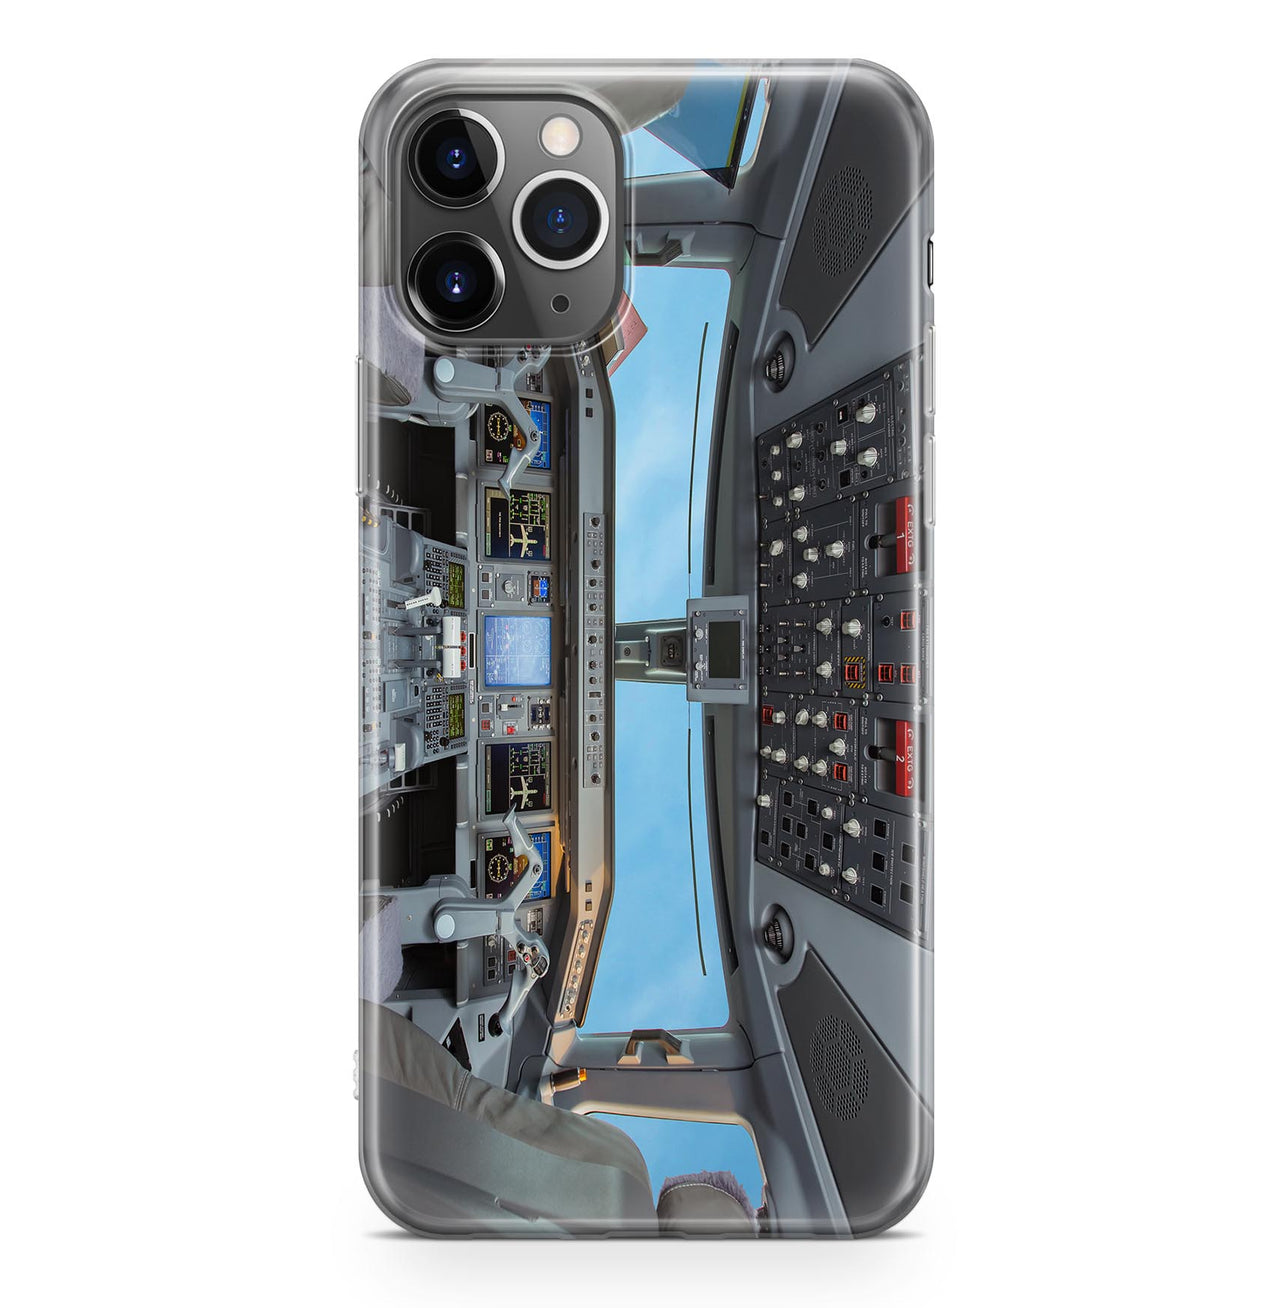 Embraer E190 Cockpit Printed iPhone Cases